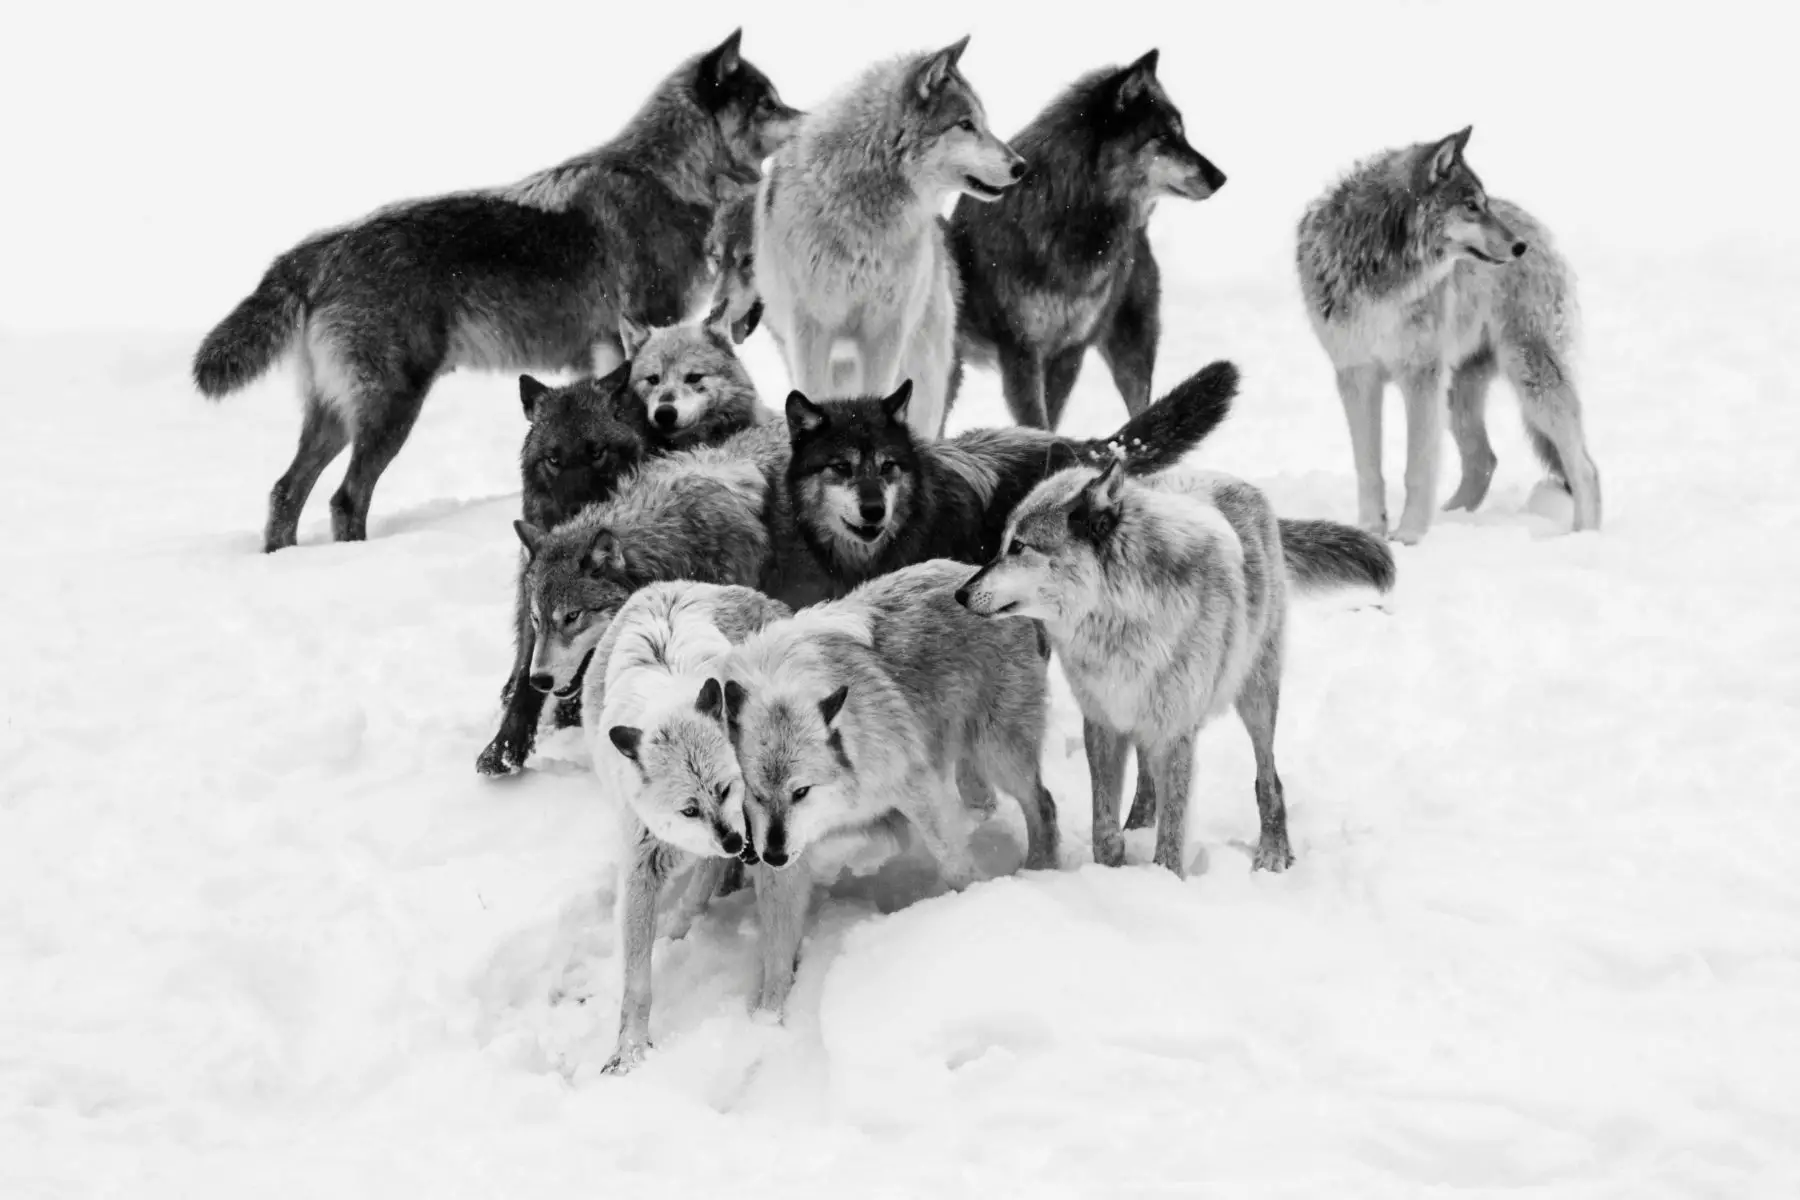 A group of timber wolf pack in winter.